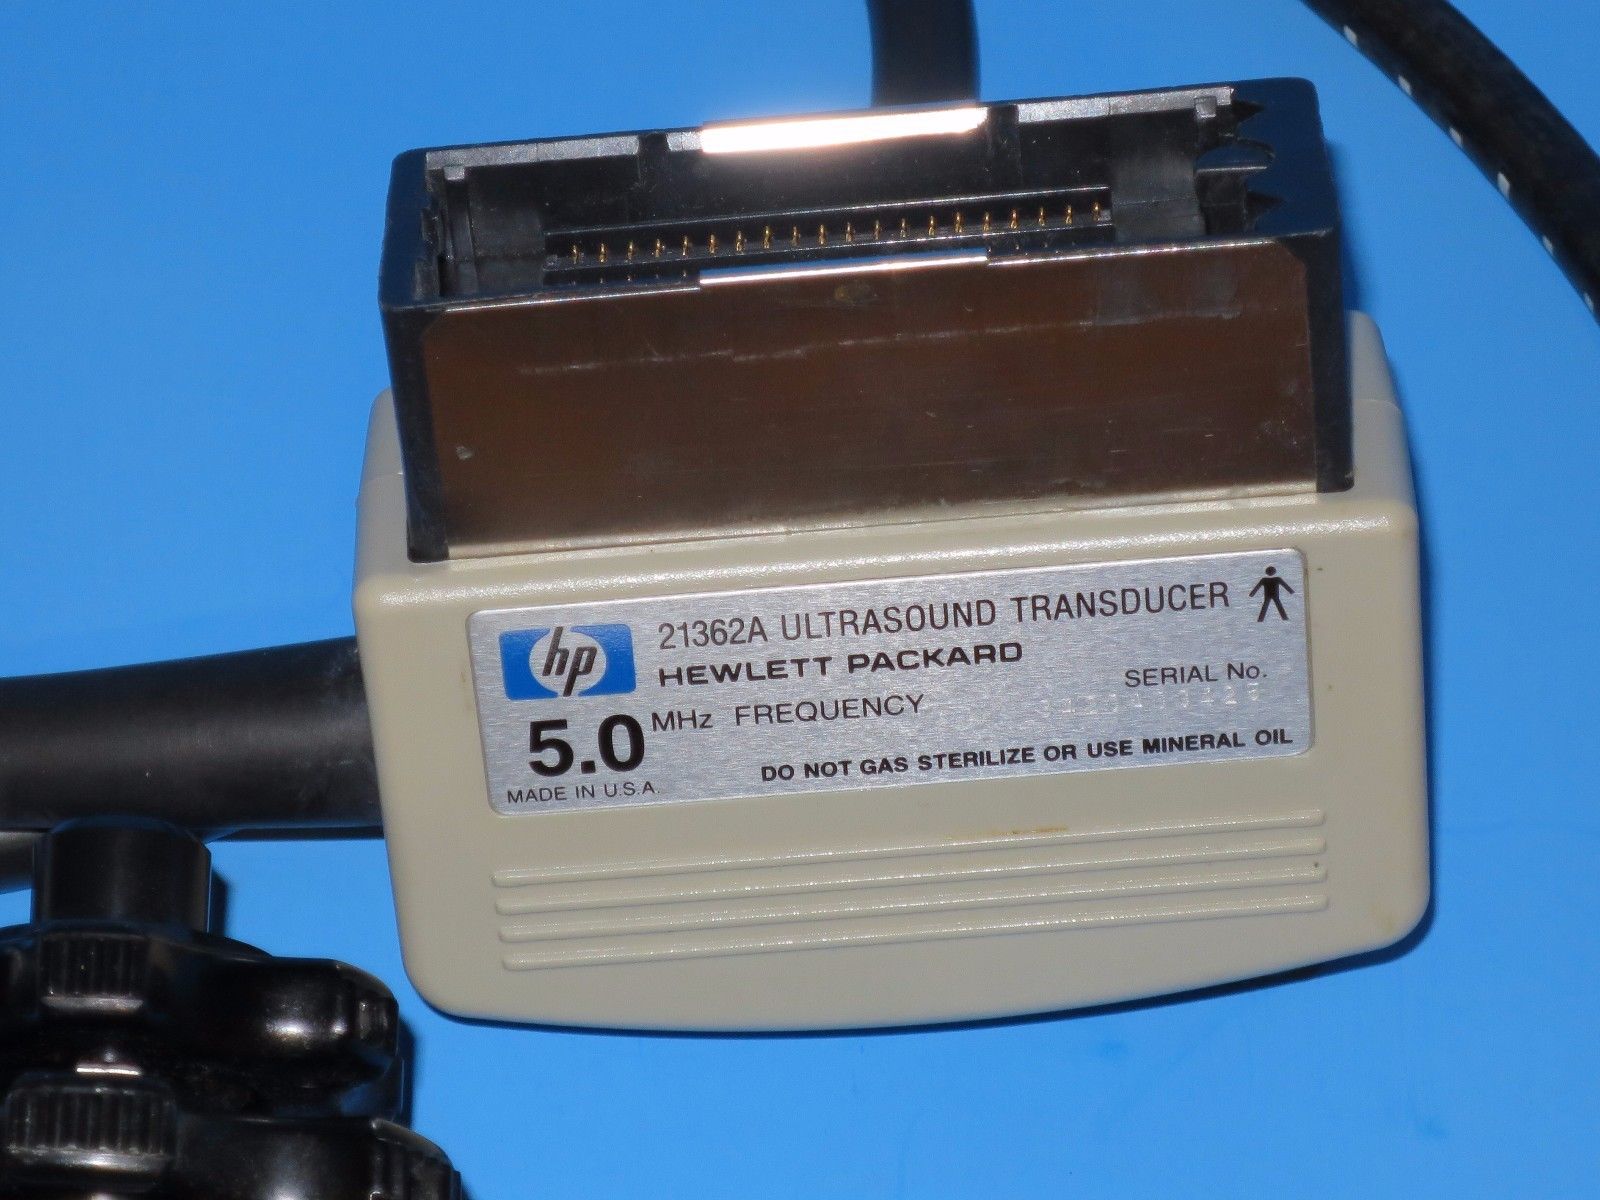 HP 21362A 5.0 MHz Ultrasound Transducer Sonogram Transesophageal Case & Guards